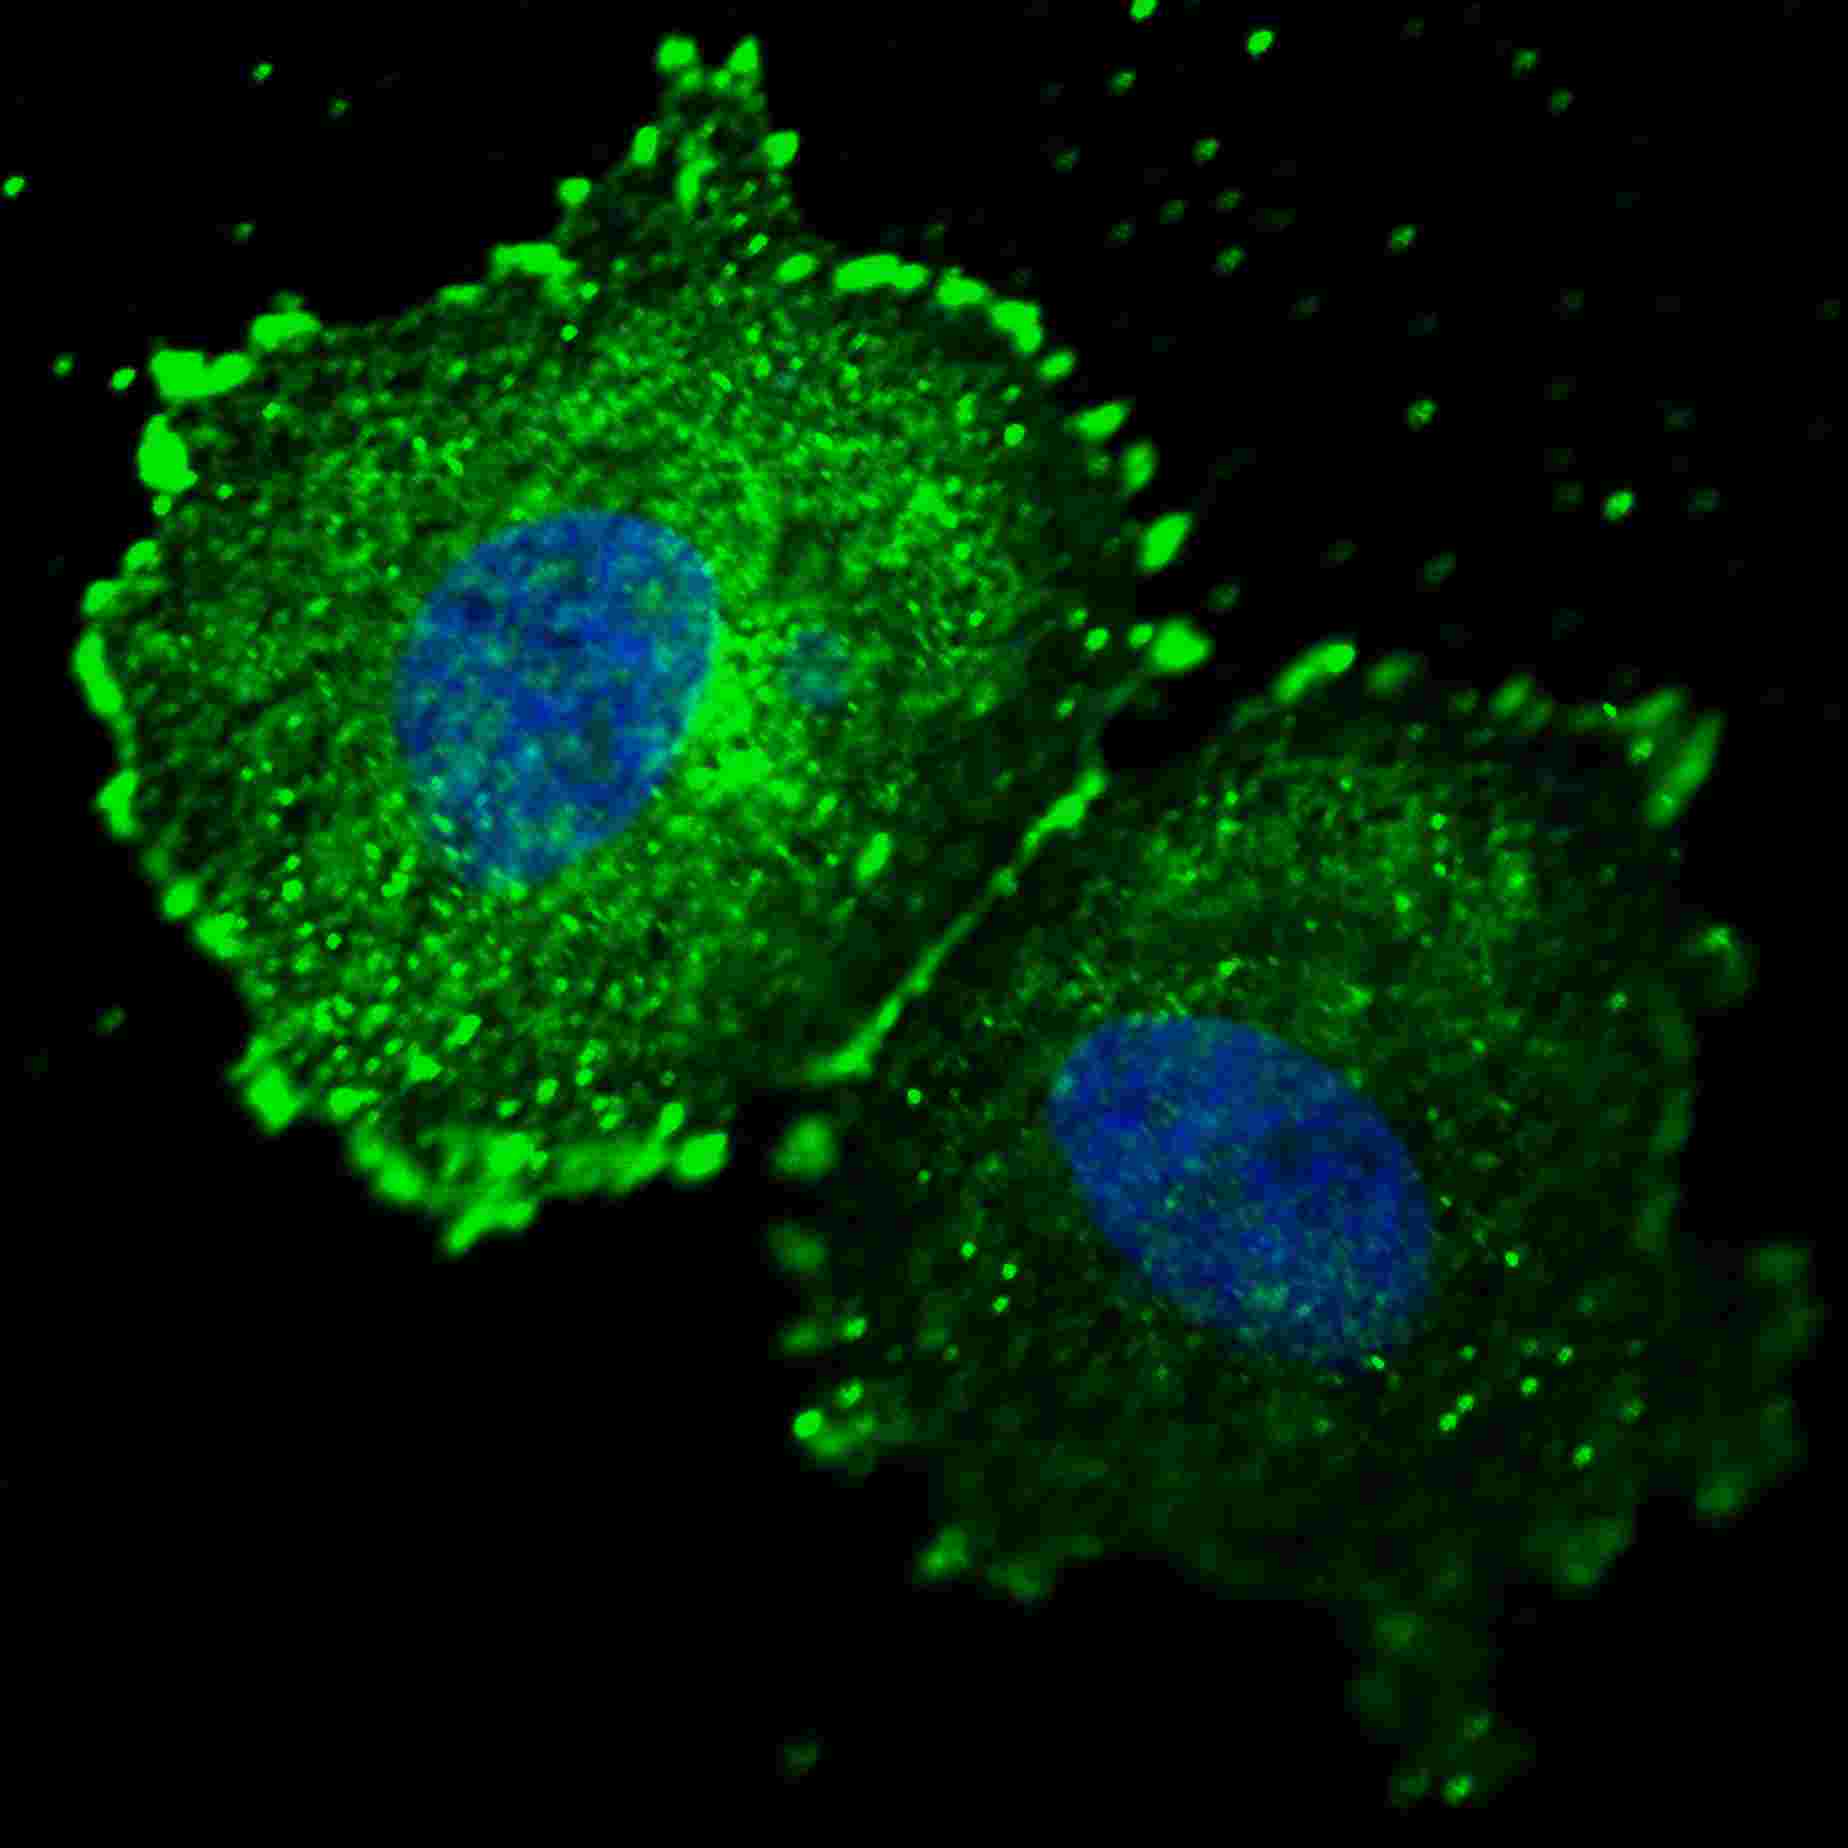 Fluorescent confocal image of MCF7 cells stained with phospho-ERBB2-Y1005 antibody. MCF7 cells were fixed with 4% PFA (20 min), permeabilized with Triton X-100 (0.2%, 30 min).  Cells were then incubated with AP3781s phospho-ERBB2- Y1005 primary antibody (1:100, 2 h at room temperature). For secondary antibody, Alexa Fluor� 488 conjugated donkey anti-rabbit antibody (green) was used (1:1000, 1h). Nuclei were counterstained with Hoechst 33342 (blue) (10 ?g/ml, 5 min). Note the highly specific localization of the phospho-ERBB2-Y1005 to the plasma membrane and cytoplasm.